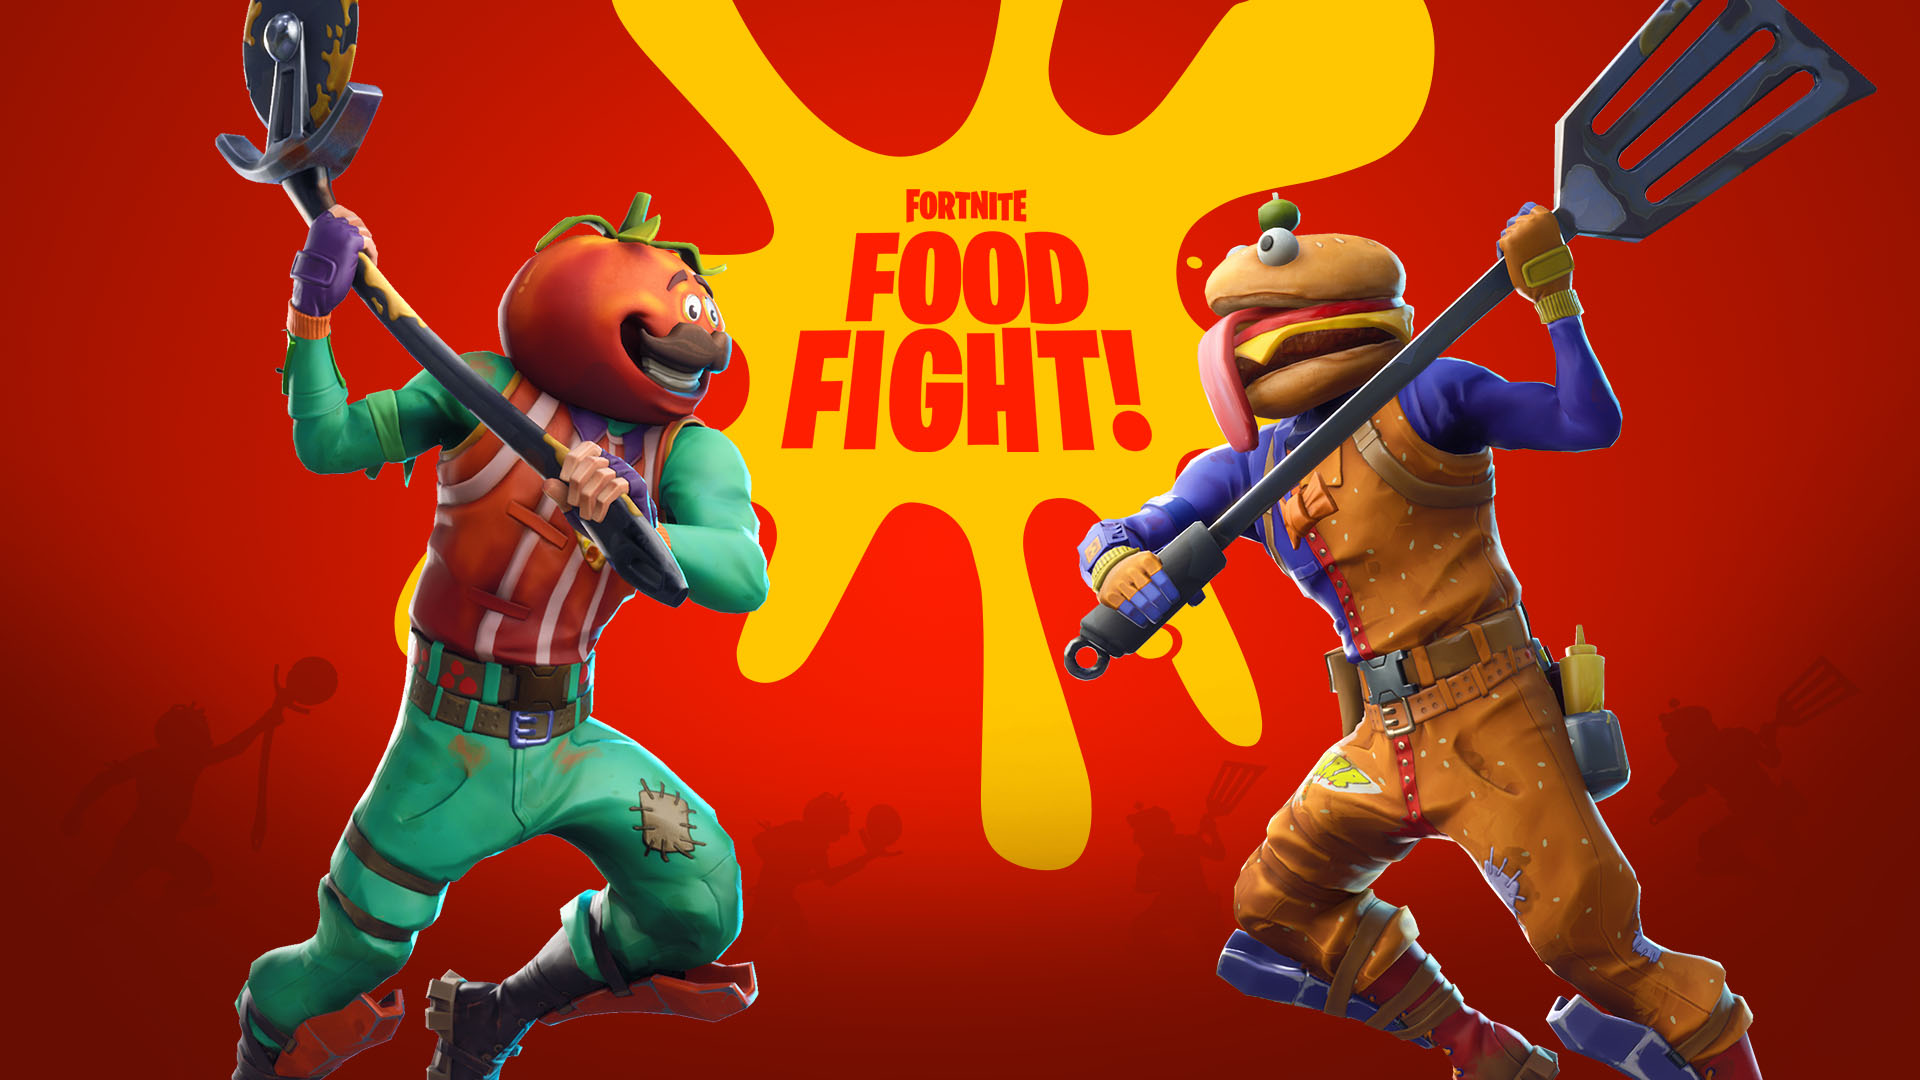 fortnite s food fight ltm receives adjustments to help players feel like they re making more progress - mascote e sports fortnite